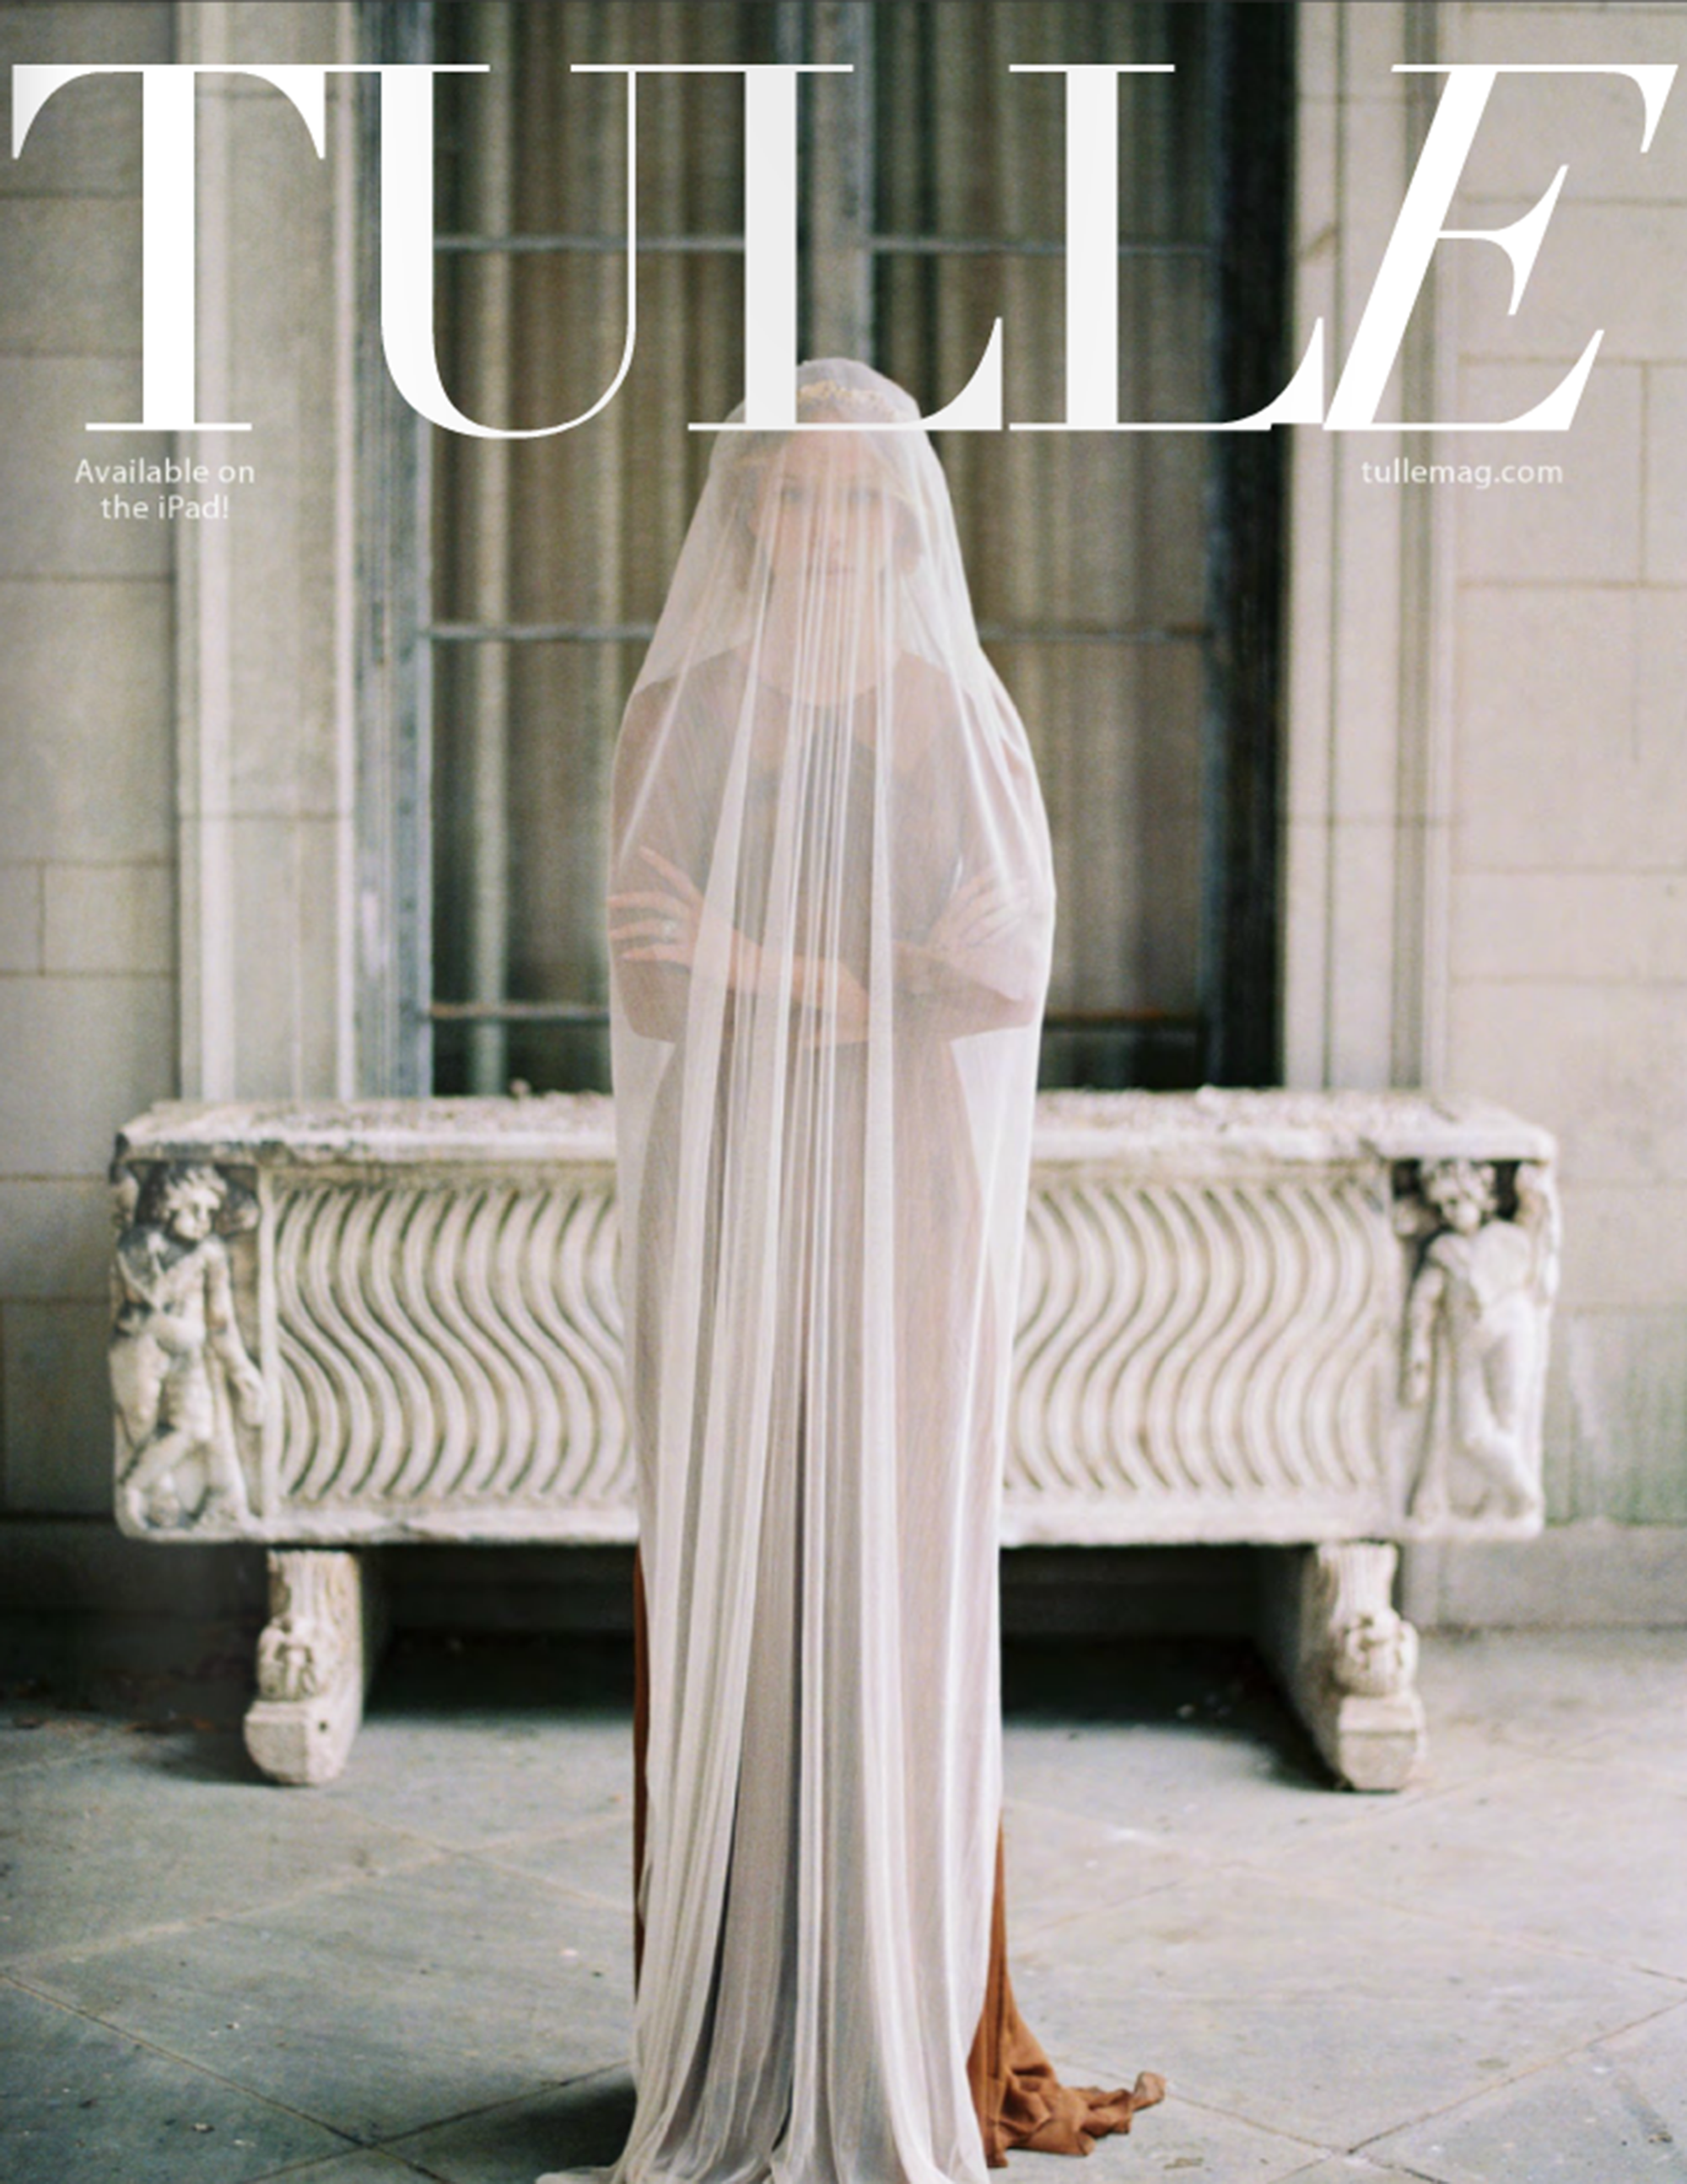 Santa Barbara elopement published in the latest issue of Tulle Magazine